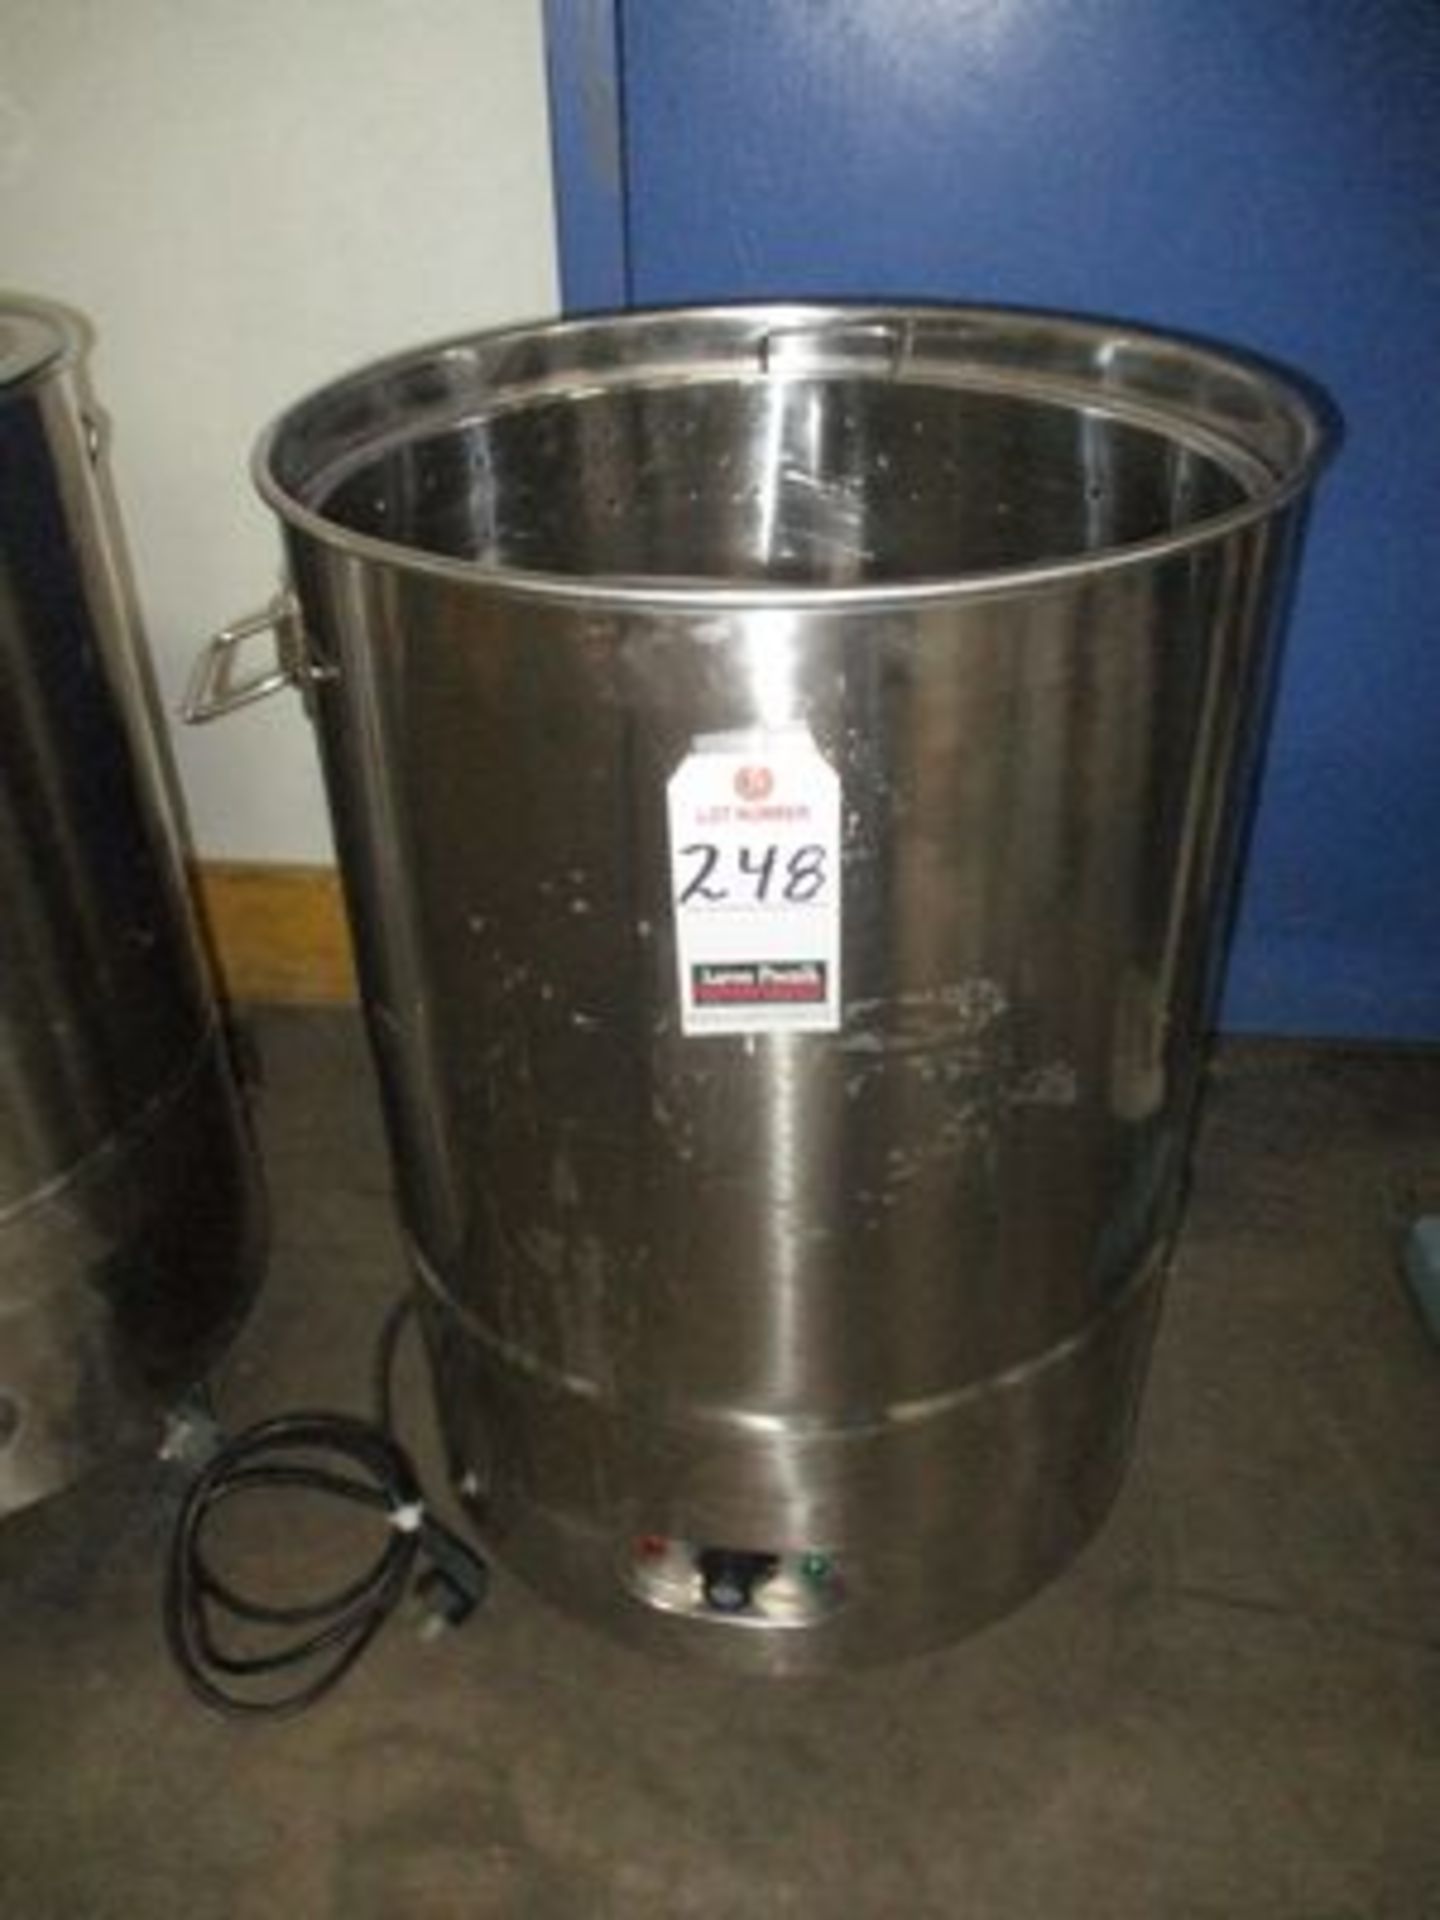 PORT. 18" DIA. HEATED S.S. MIXING KETTLE